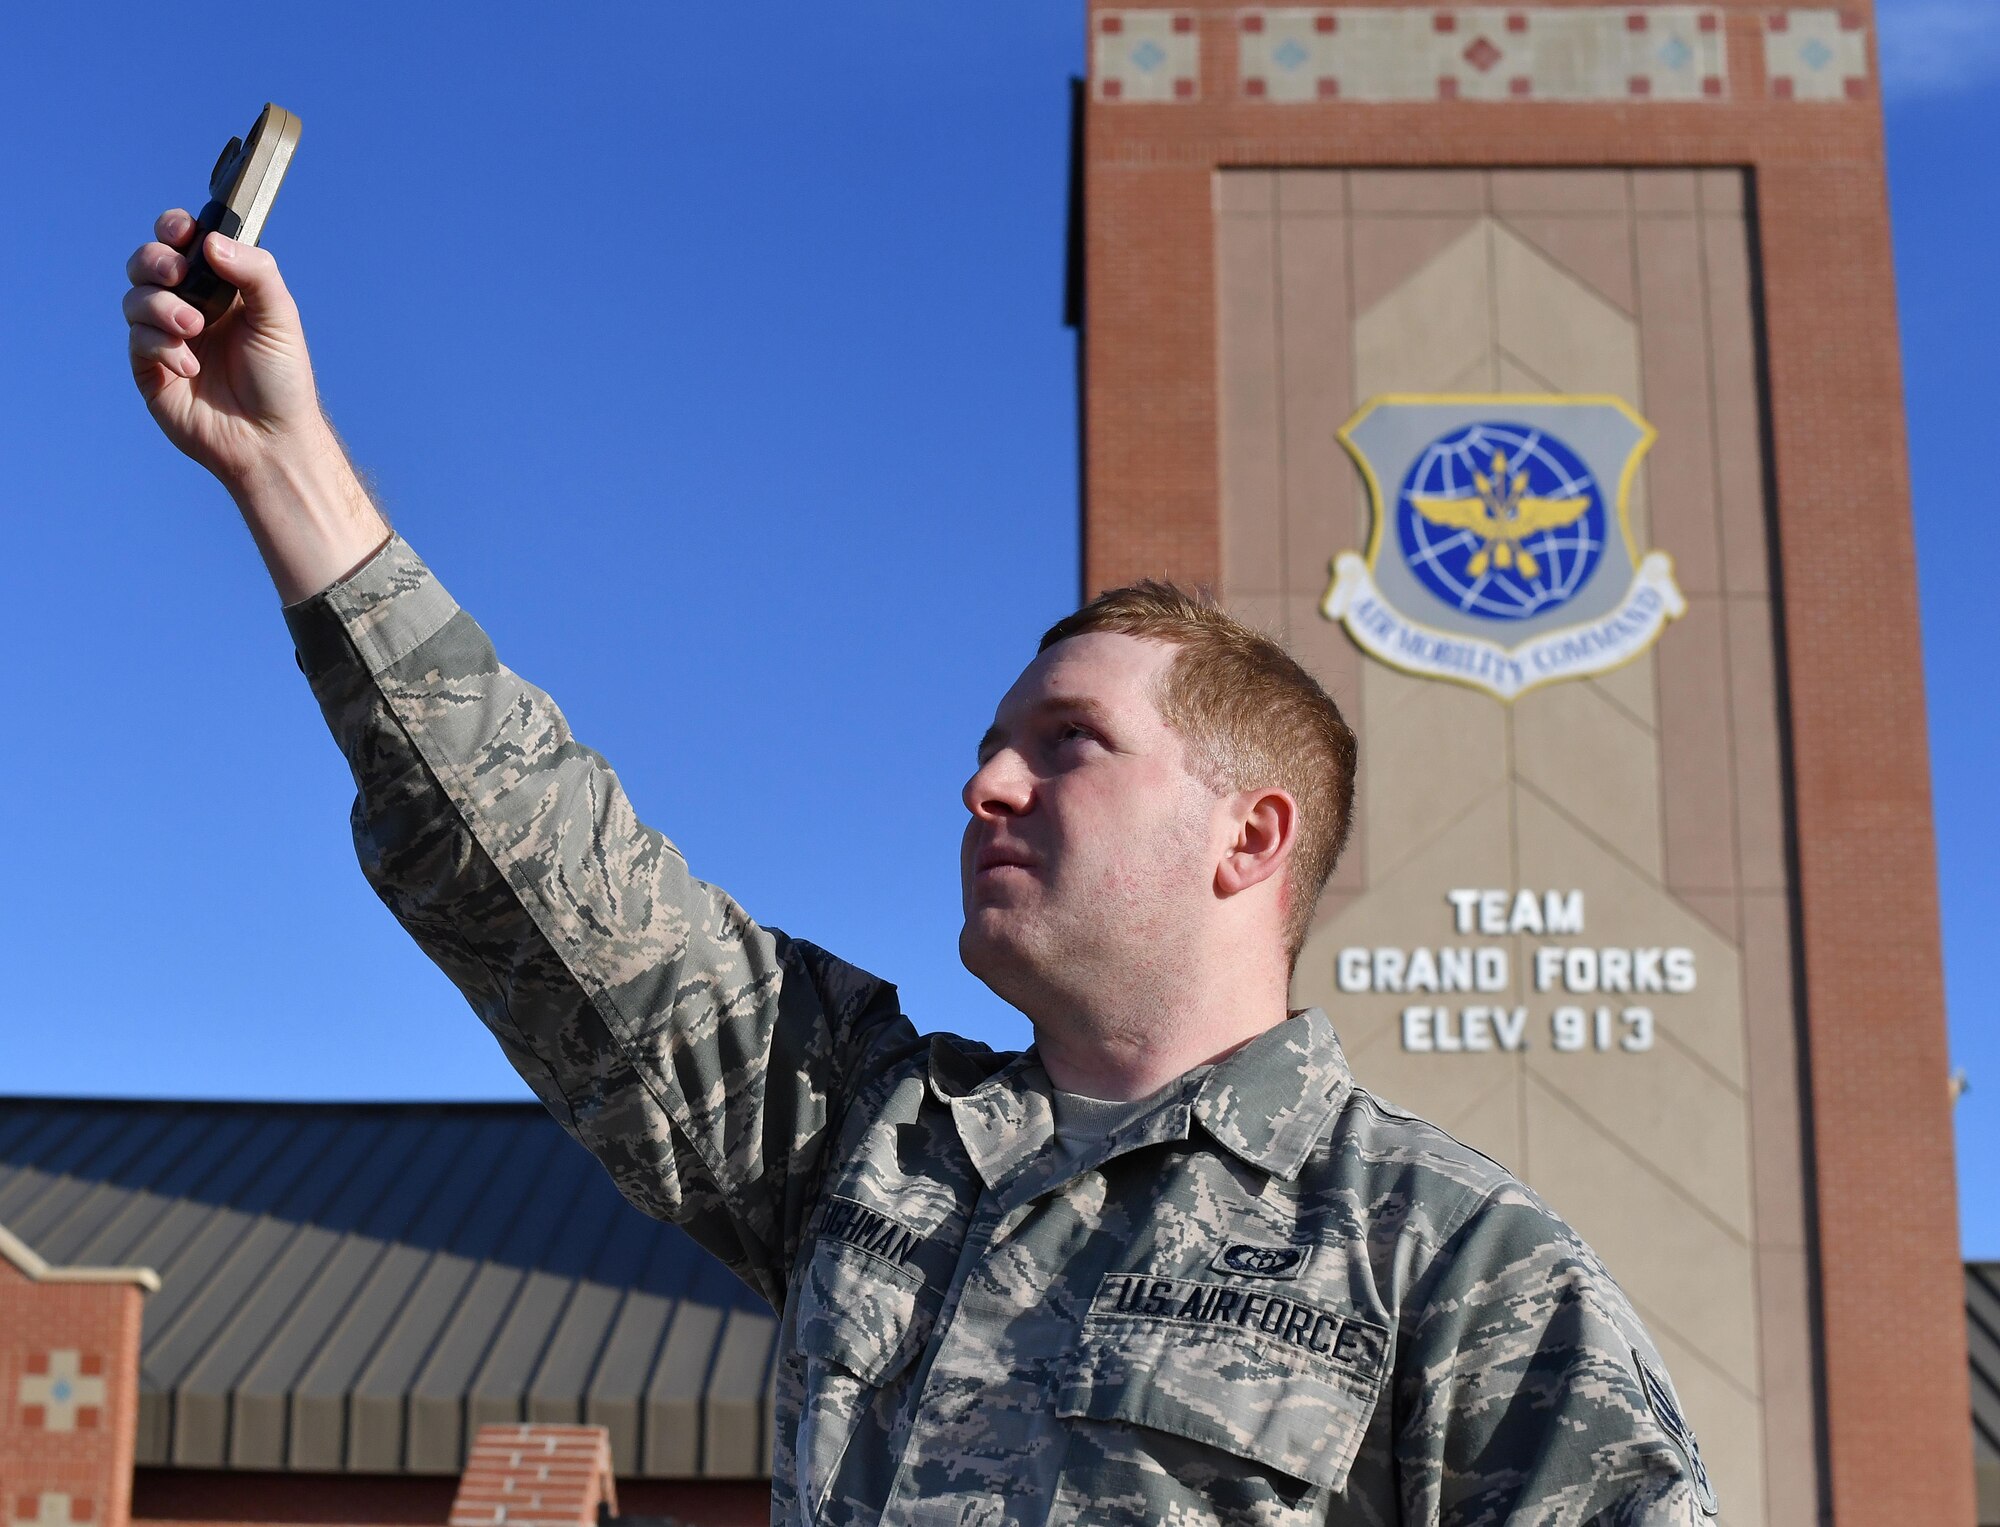 Senior Airman Jordan Baughman, 319th Operations Support Squadron weather flight forecaster, uses a weather and wind measuring device called a Kestrel meter for weather observation on Grand Forks Air Force Base, N.D. Nov. 15, 2016. Baughman was named Air Mobility Command’s Weather Airman of the Year. (U.S. Air Force photo by Airman 1st Class Elijaih Tiggs)